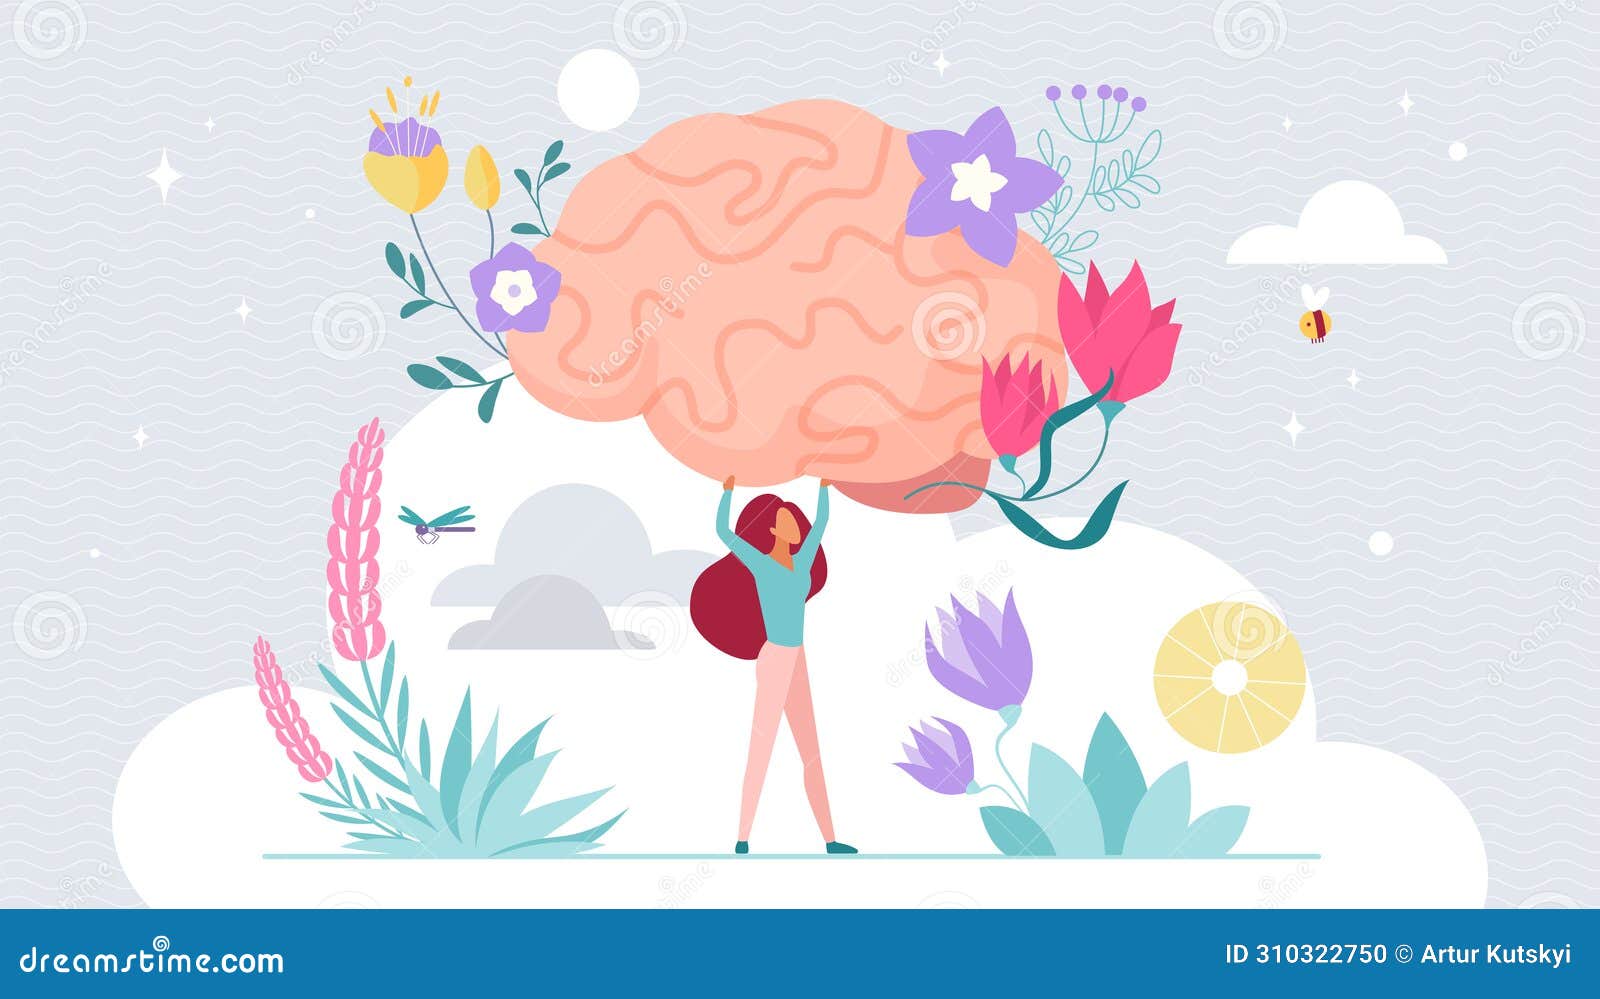 mental health, positive mindset, selfcare, tiny girl holding human brain in flowers